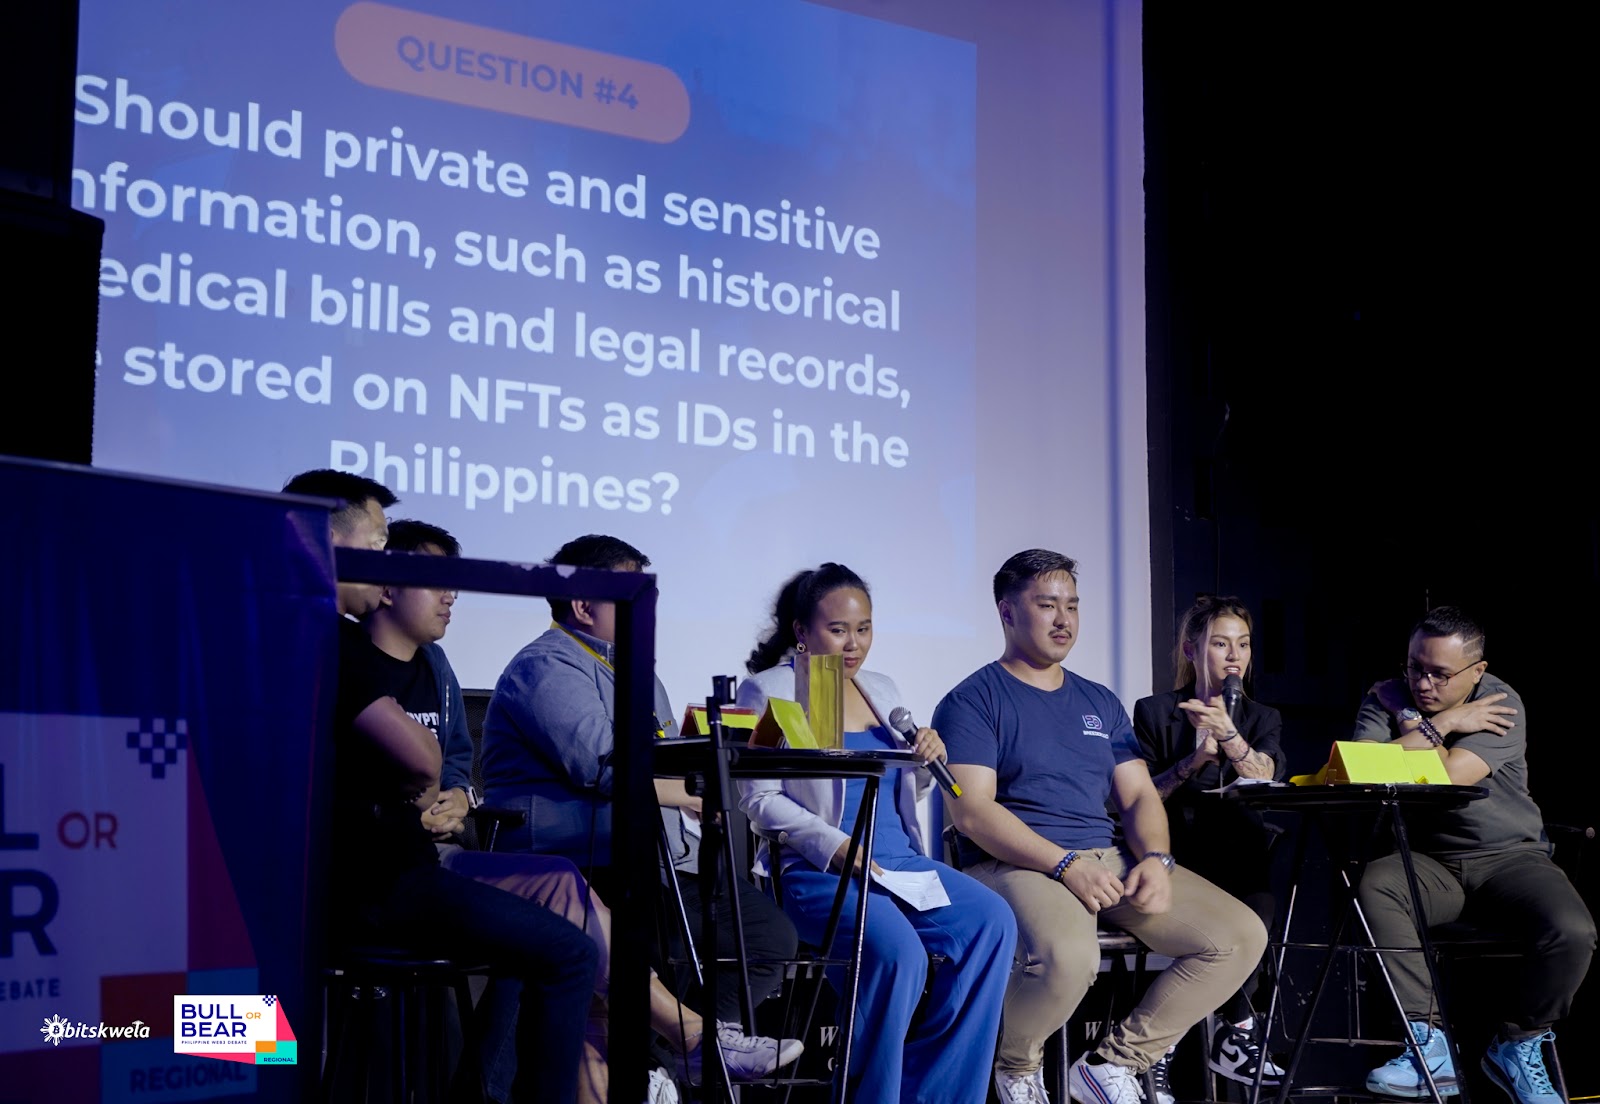 Photo for the Article - [Event Recap] ‘Bull or Bear’ Web3 Debate Davao on Future Crypto and NFT Use Cases